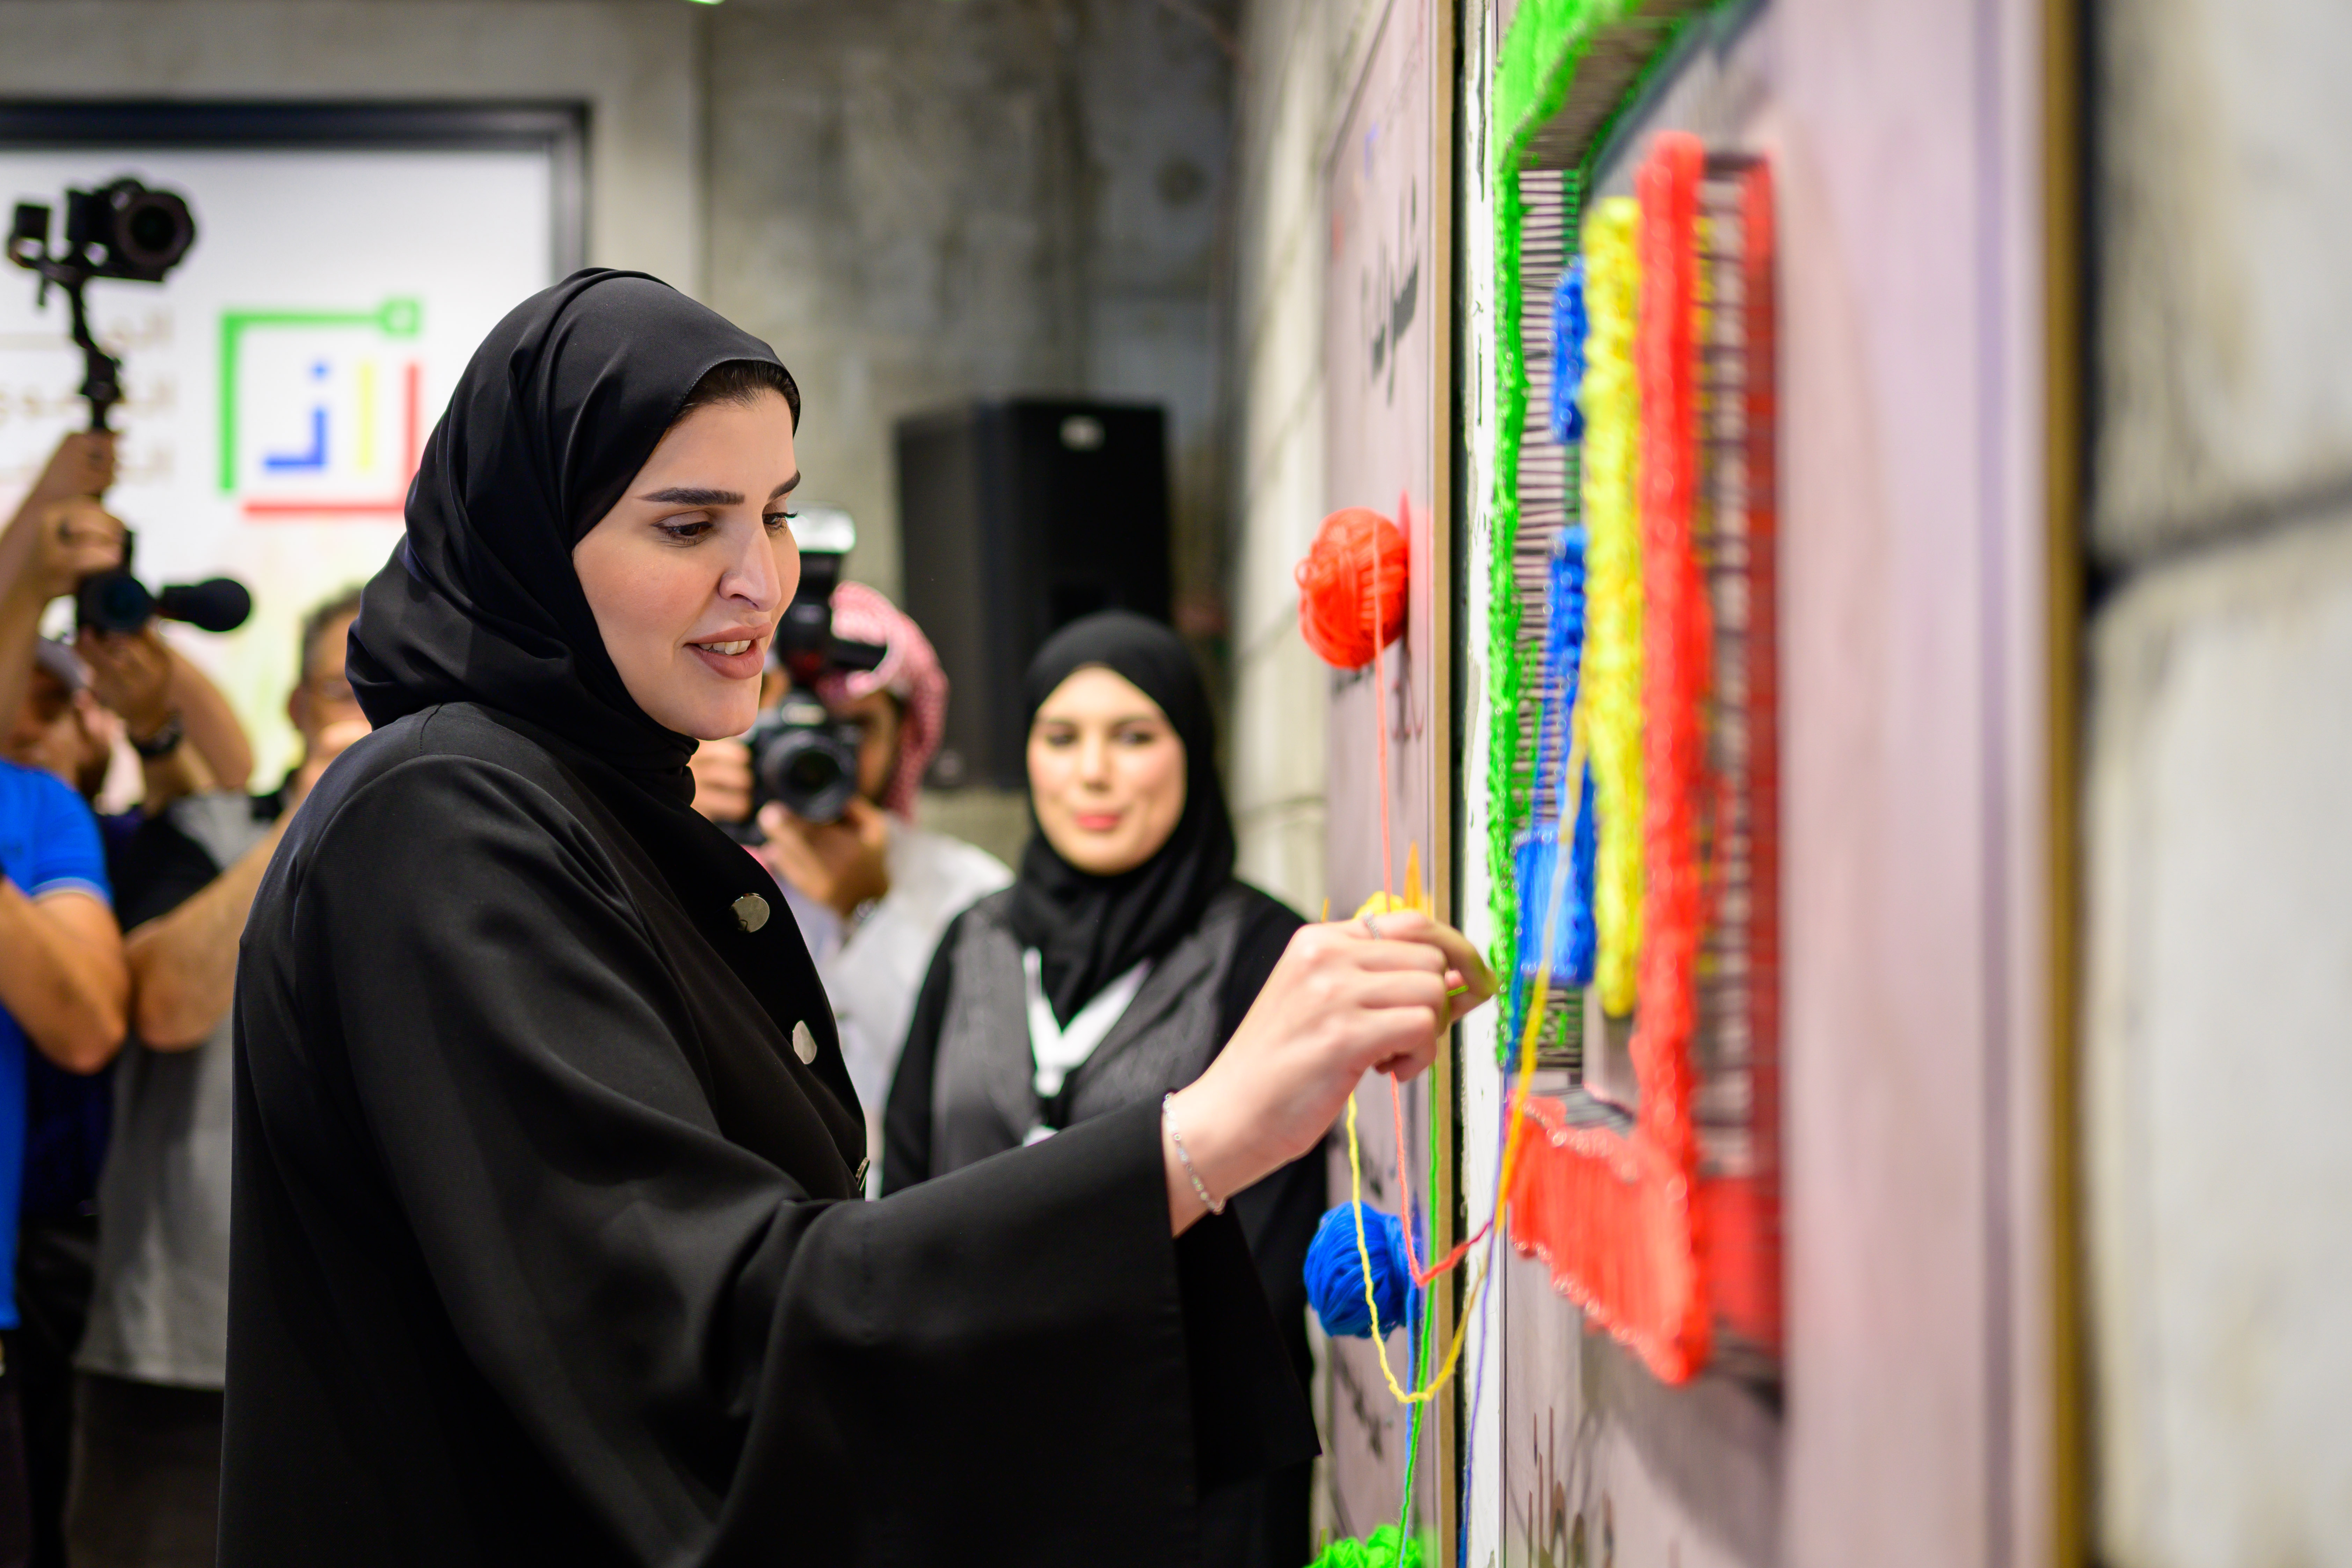 HE Minister of Social Development and Family Maryam bint Ali bin Nasser Al Misned, inaugurated today the first artistic awareness exhibition to promote family cohesion titled Al Malath